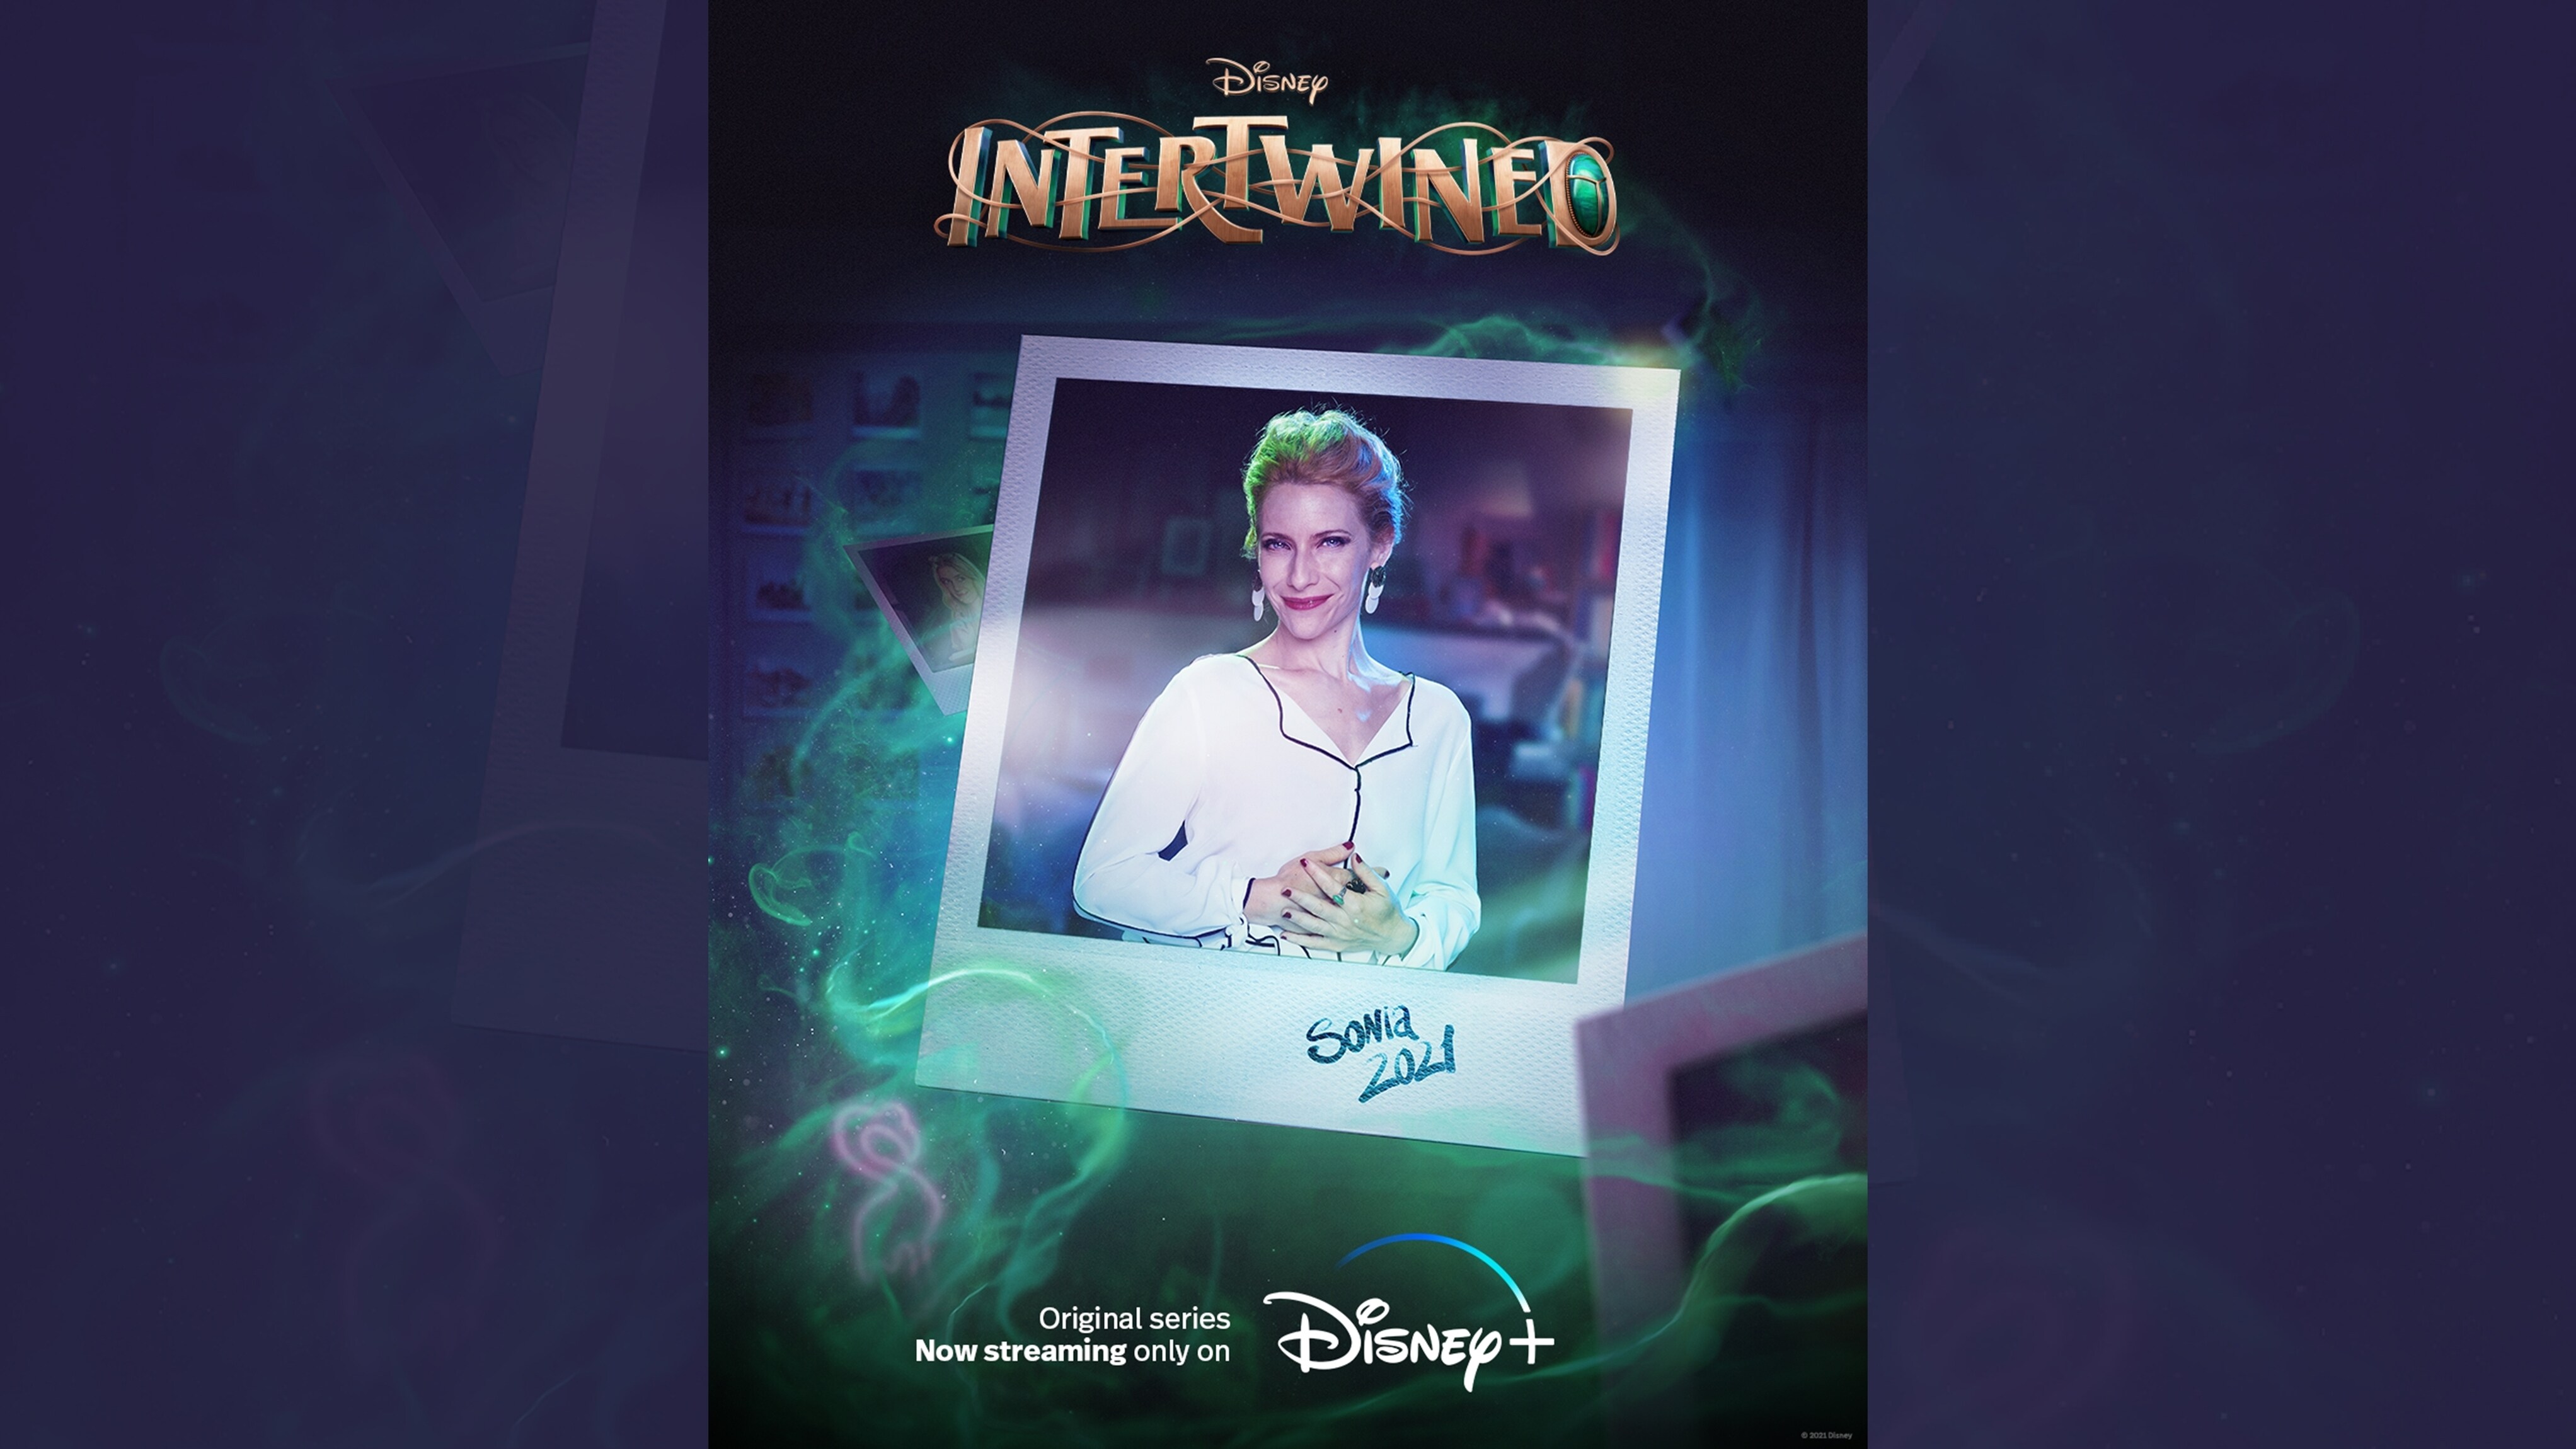 Disney | Intertwined | Sonia (2021) | Original series now streaming only on Disney+